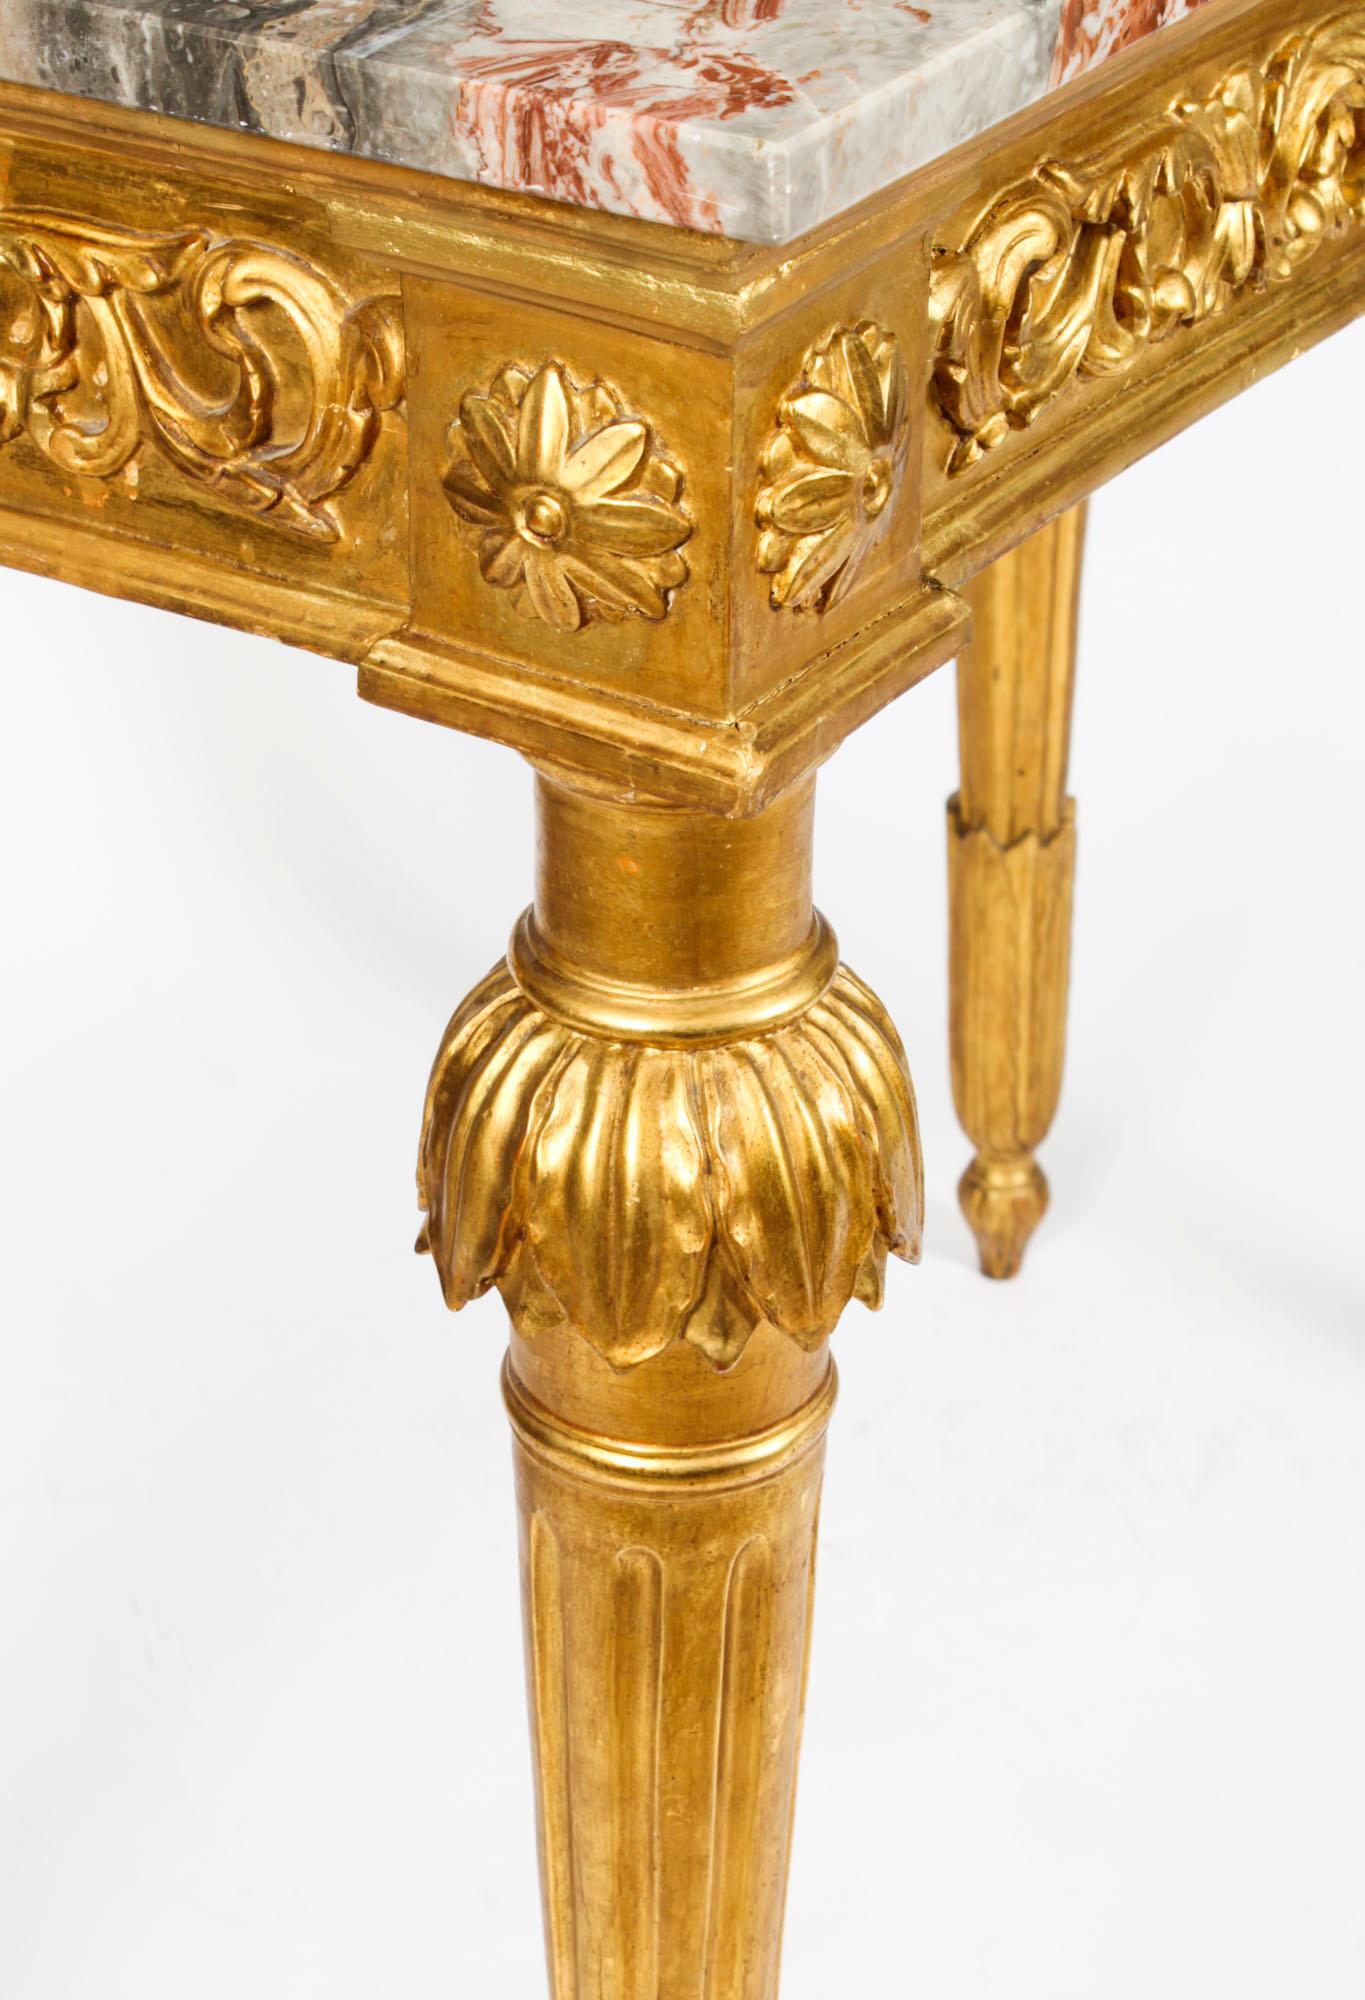 Antique Louis XV Revival Carved Giltwood Console Pier Table, 19th Century For Sale 8